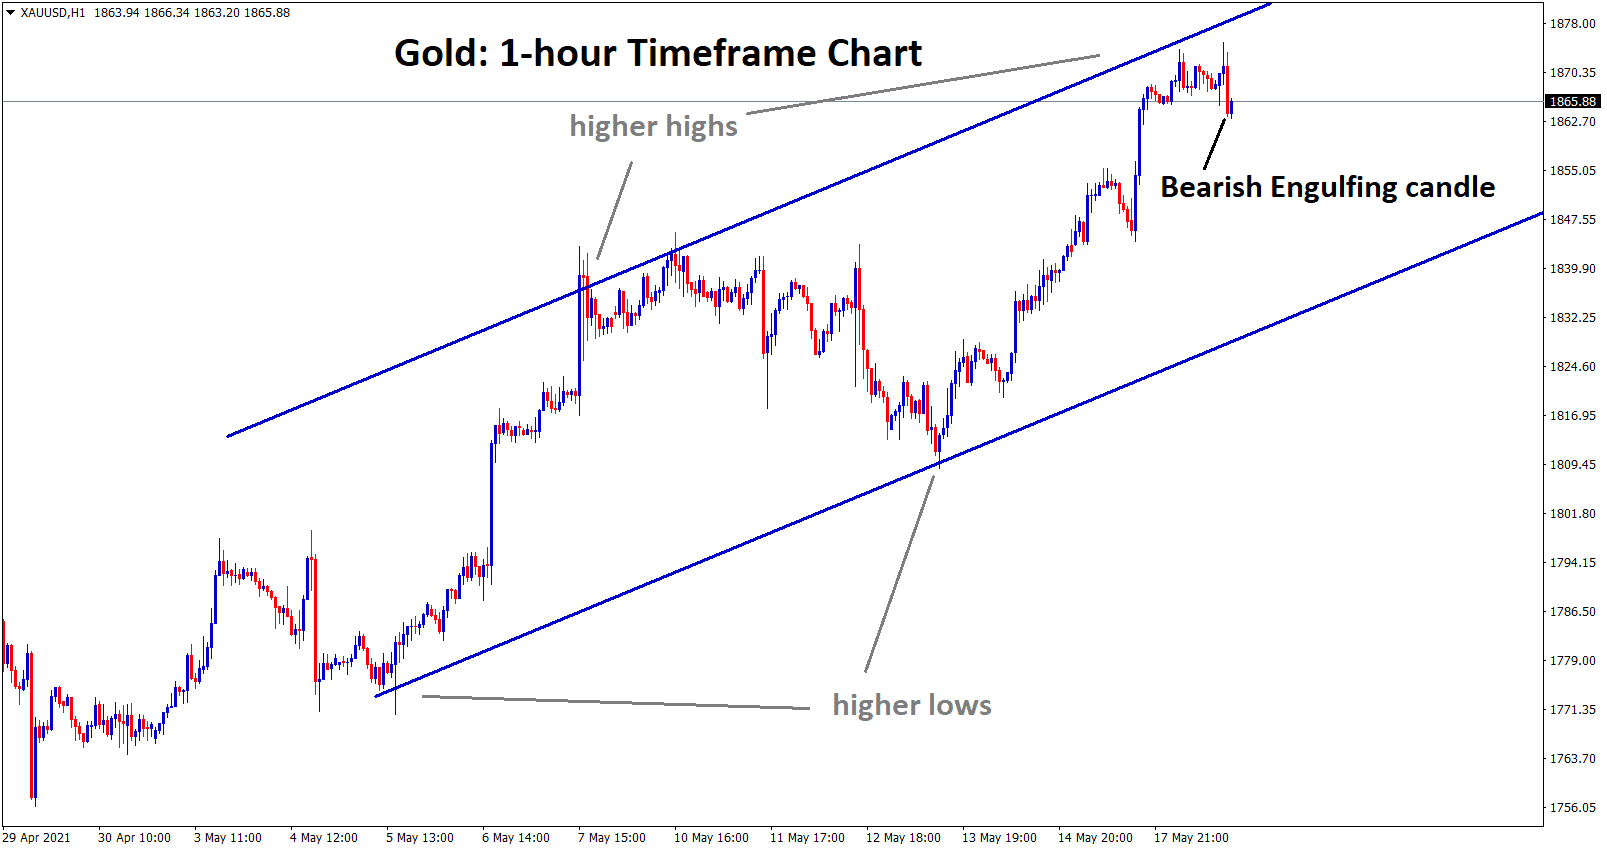 Gold at the higher high zone creating a bearish engulfing candle.